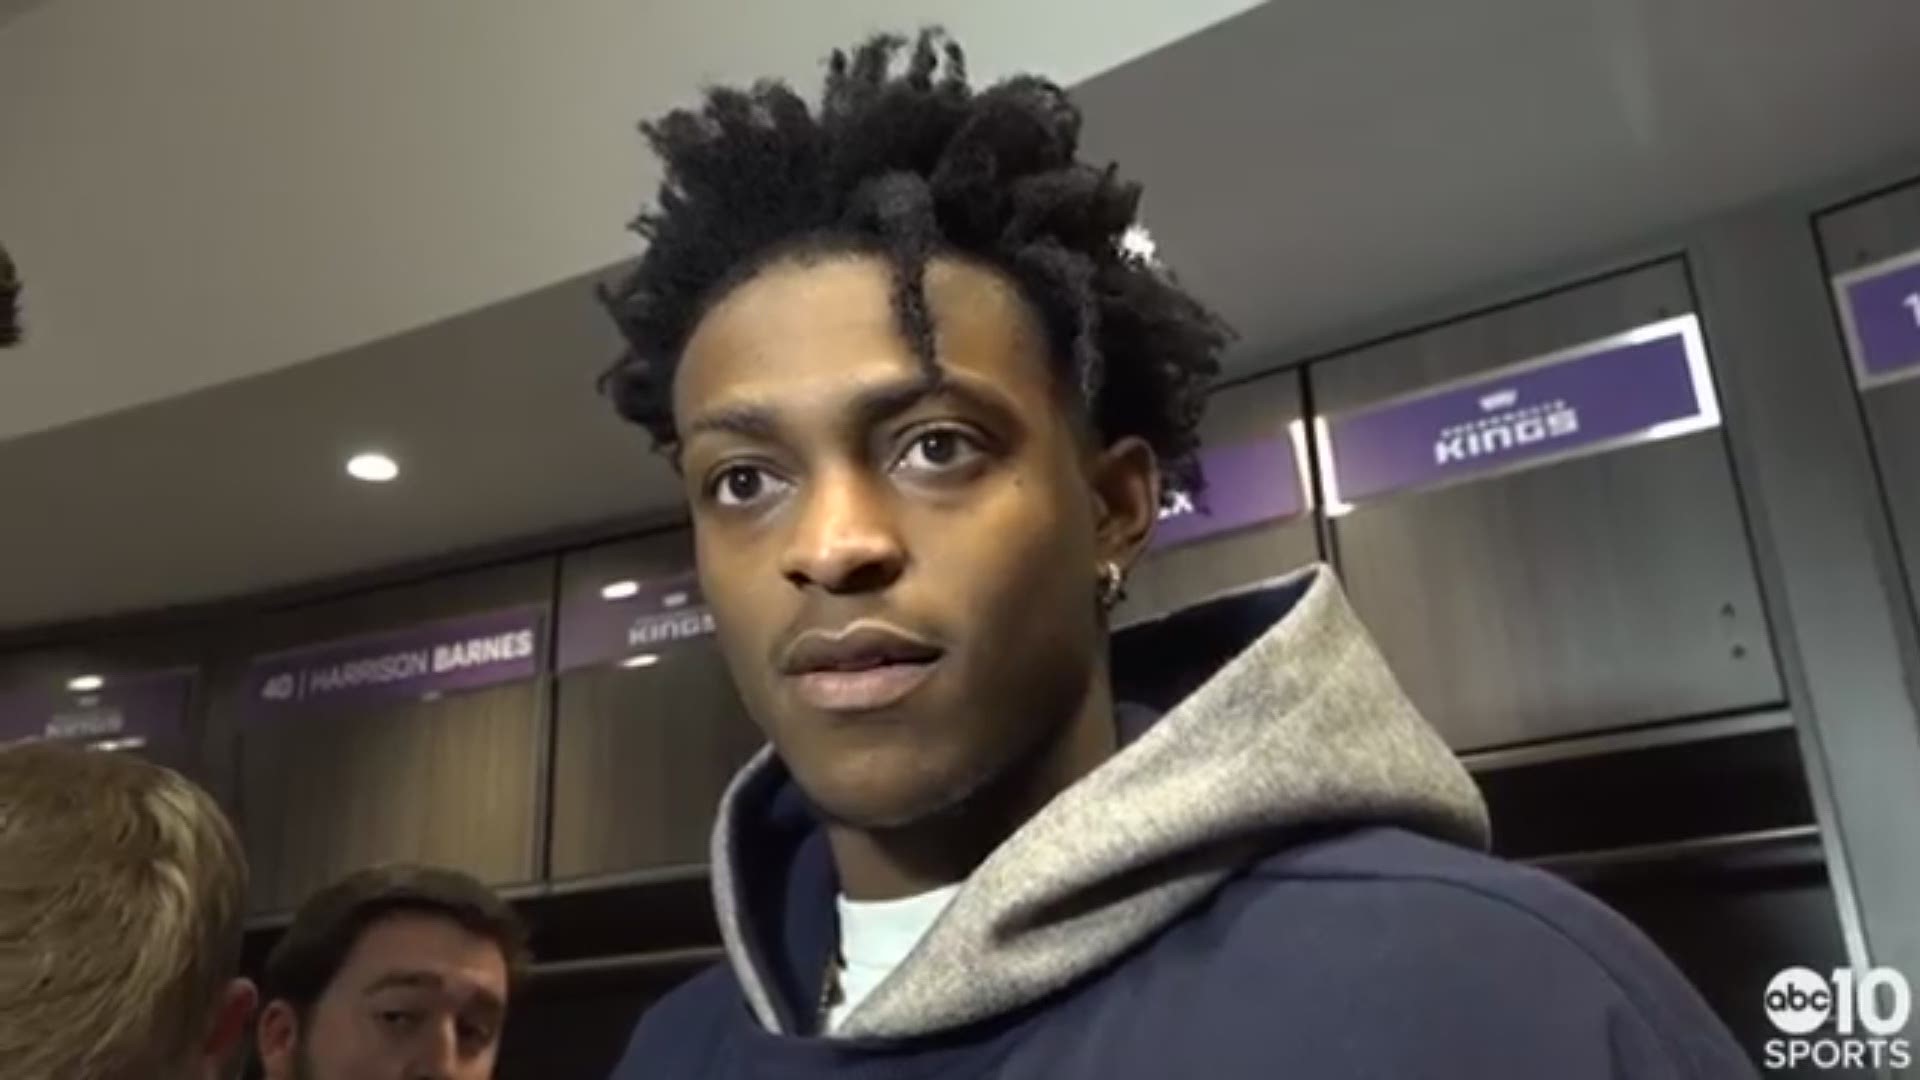 Kings point guard De'Aaron Fox talks about Sunday's blowout win over the Chicago Bulls, the victory coming at a much-needed time given the rough streak his team has experienced and the team reaching the 34 win mark for the first time since the 2007-08 season.